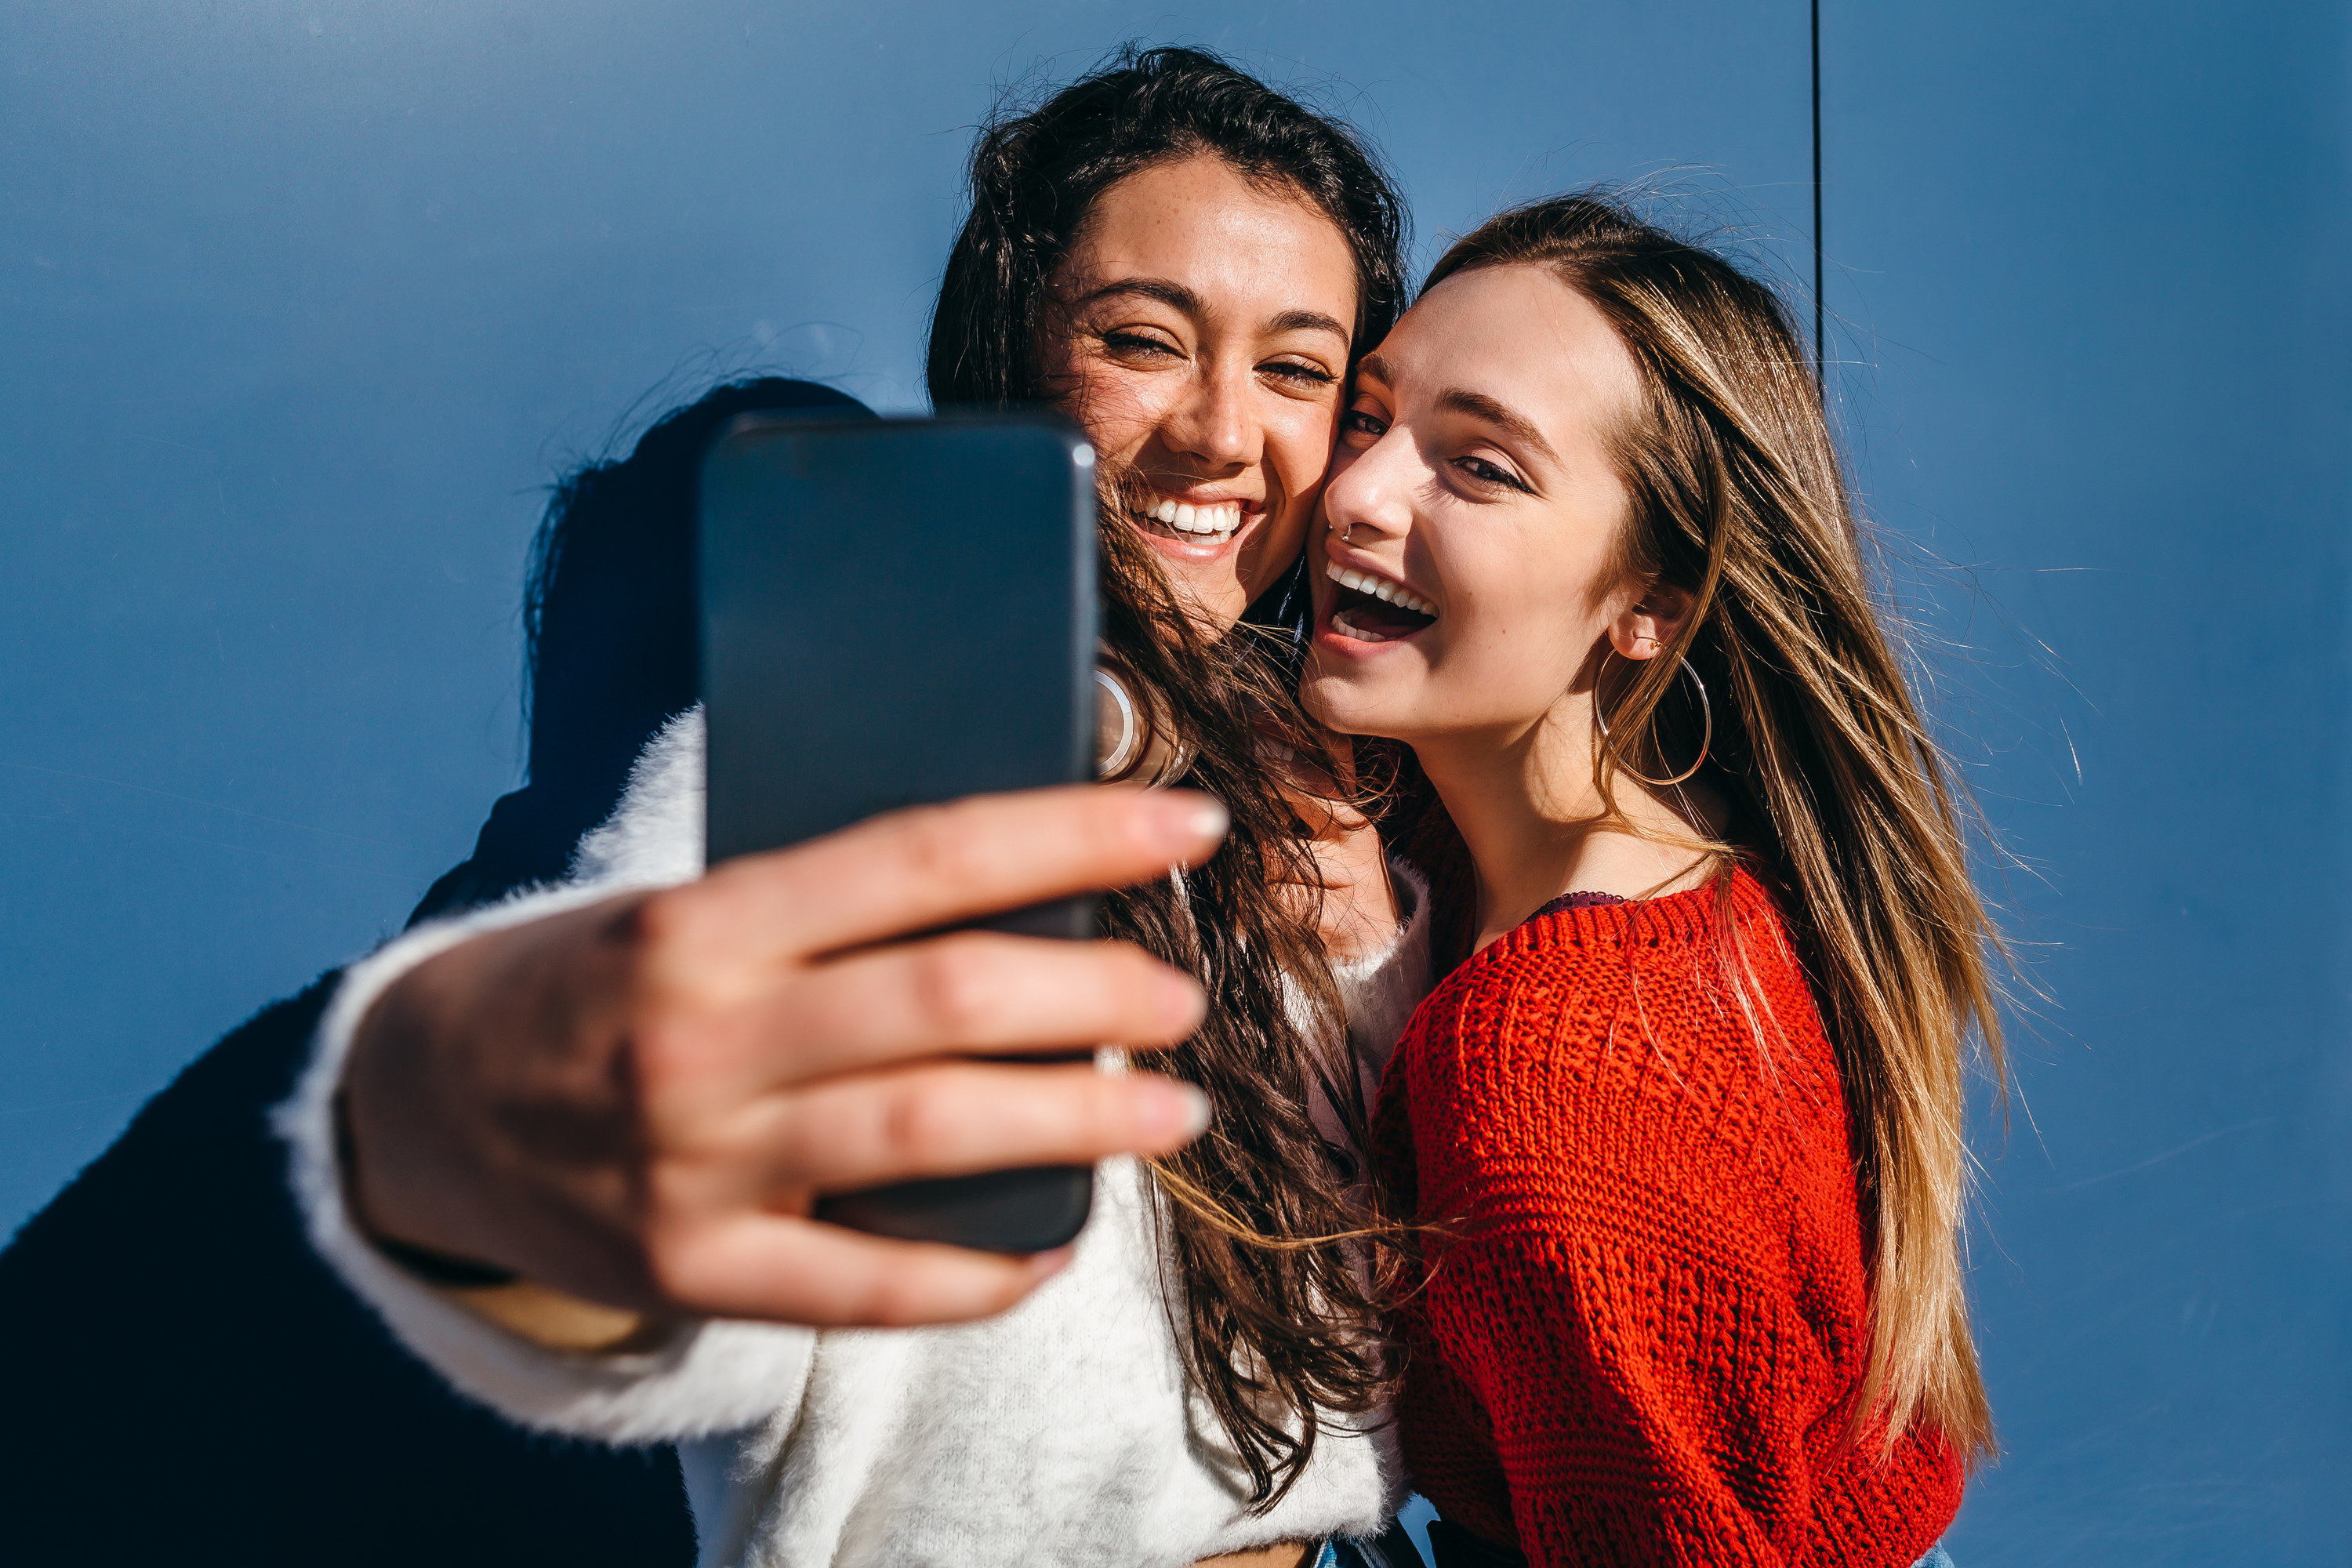 Two female friends taking a selfie together